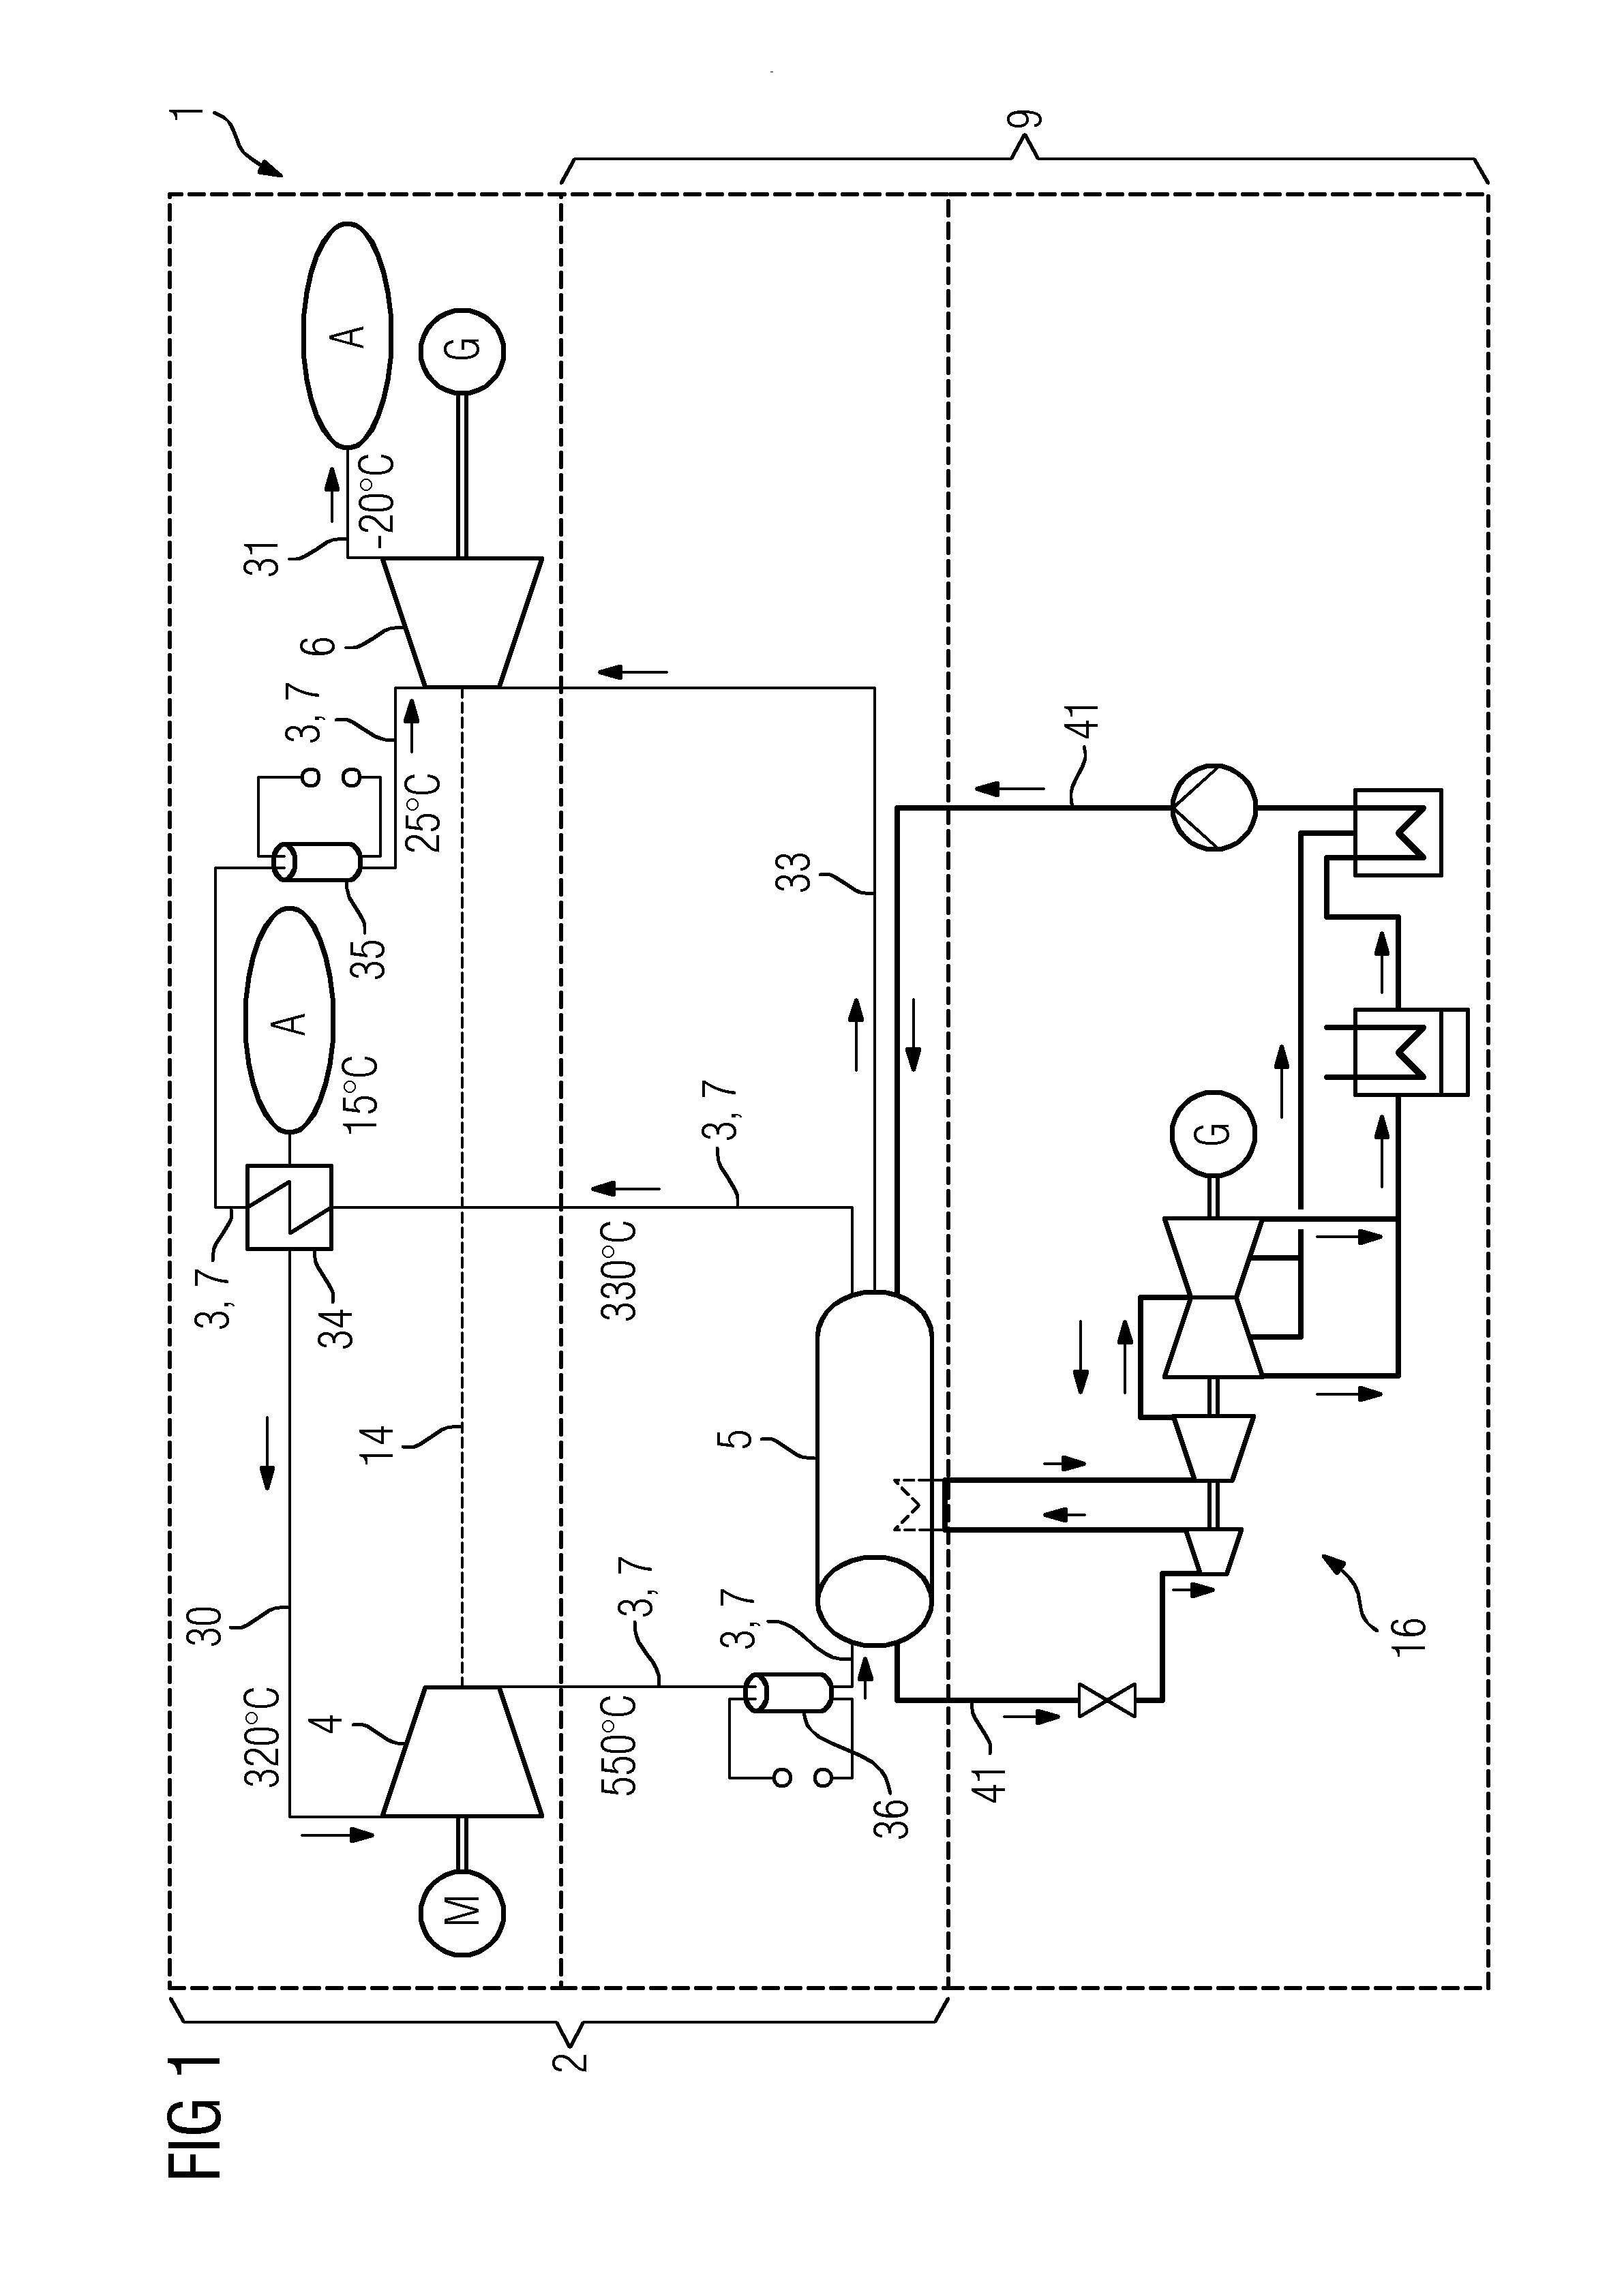 Energy storage installation with open charging circuit for storing seasonally occurring excess electrical energy